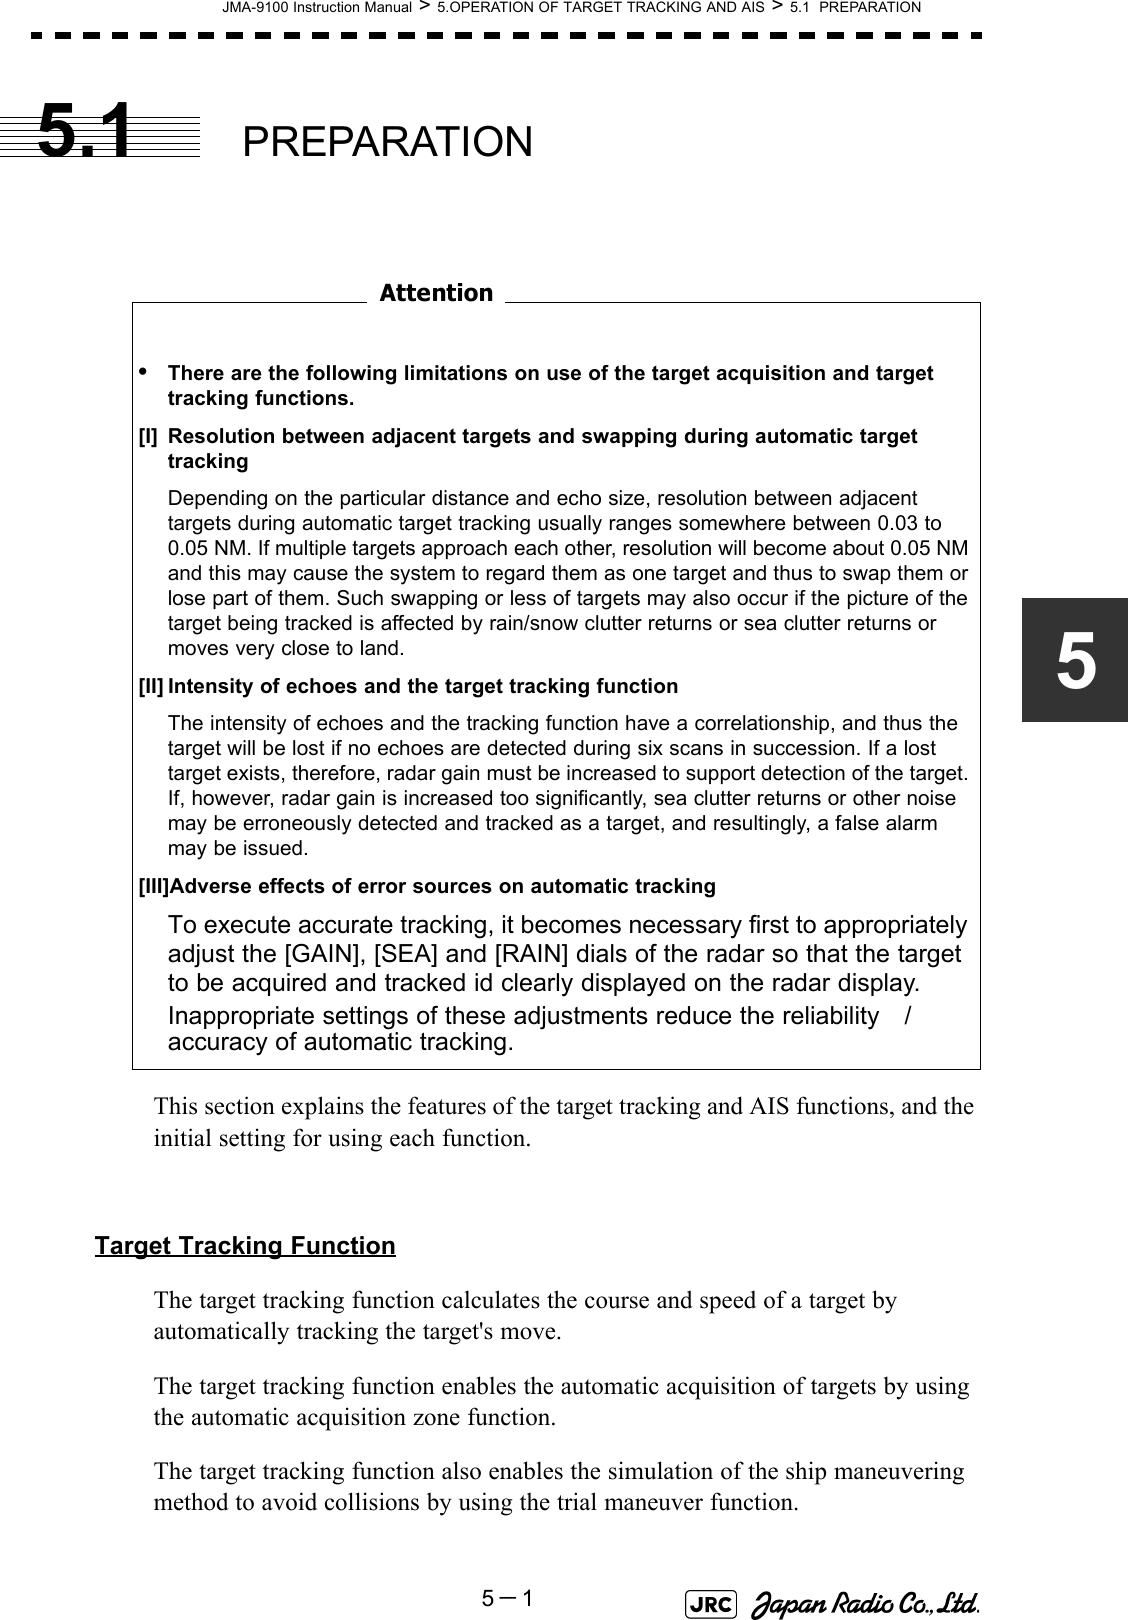 JMA-9100 Instruction Manual &gt; 5.OPERATION OF TARGET TRACKING AND AIS &gt; 5.1  PREPARATION5－155.1 PREPARATION　　　　　　　　This section explains the features of the target tracking and AIS functions, and the initial setting for using each function.Target Tracking FunctionThe target tracking function calculates the course and speed of a target by automatically tracking the target&apos;s move. The target tracking function enables the automatic acquisition of targets by using the automatic acquisition zone function.  The target tracking function also enables the simulation of the ship maneuvering method to avoid collisions by using the trial maneuver function.•There are the following limitations on use of the target acquisition and target tracking functions.[I] Resolution between adjacent targets and swapping during automatic target trackingDepending on the particular distance and echo size, resolution between adjacent targets during automatic target tracking usually ranges somewhere between 0.03 to 0.05 NM. If multiple targets approach each other, resolution will become about 0.05 NM and this may cause the system to regard them as one target and thus to swap them or lose part of them. Such swapping or less of targets may also occur if the picture of the target being tracked is affected by rain/snow clutter returns or sea clutter returns or moves very close to land.[II] Intensity of echoes and the target tracking functionThe intensity of echoes and the tracking function have a correlationship, and thus the target will be lost if no echoes are detected during six scans in succession. If a lost target exists, therefore, radar gain must be increased to support detection of the target. If, however, radar gain is increased too significantly, sea clutter returns or other noise may be erroneously detected and tracked as a target, and resultingly, a false alarm may be issued.[III]Adverse effects of error sources on automatic trackingTo execute accurate tracking, it becomes necessary first to appropriately adjust the [GAIN], [SEA] and [RAIN] dials of the radar so that the target to be acquired and tracked id clearly displayed on the radar display. Inappropriate settings of these adjustments reduce the reliability　/　accuracy of automatic tracking.Attention